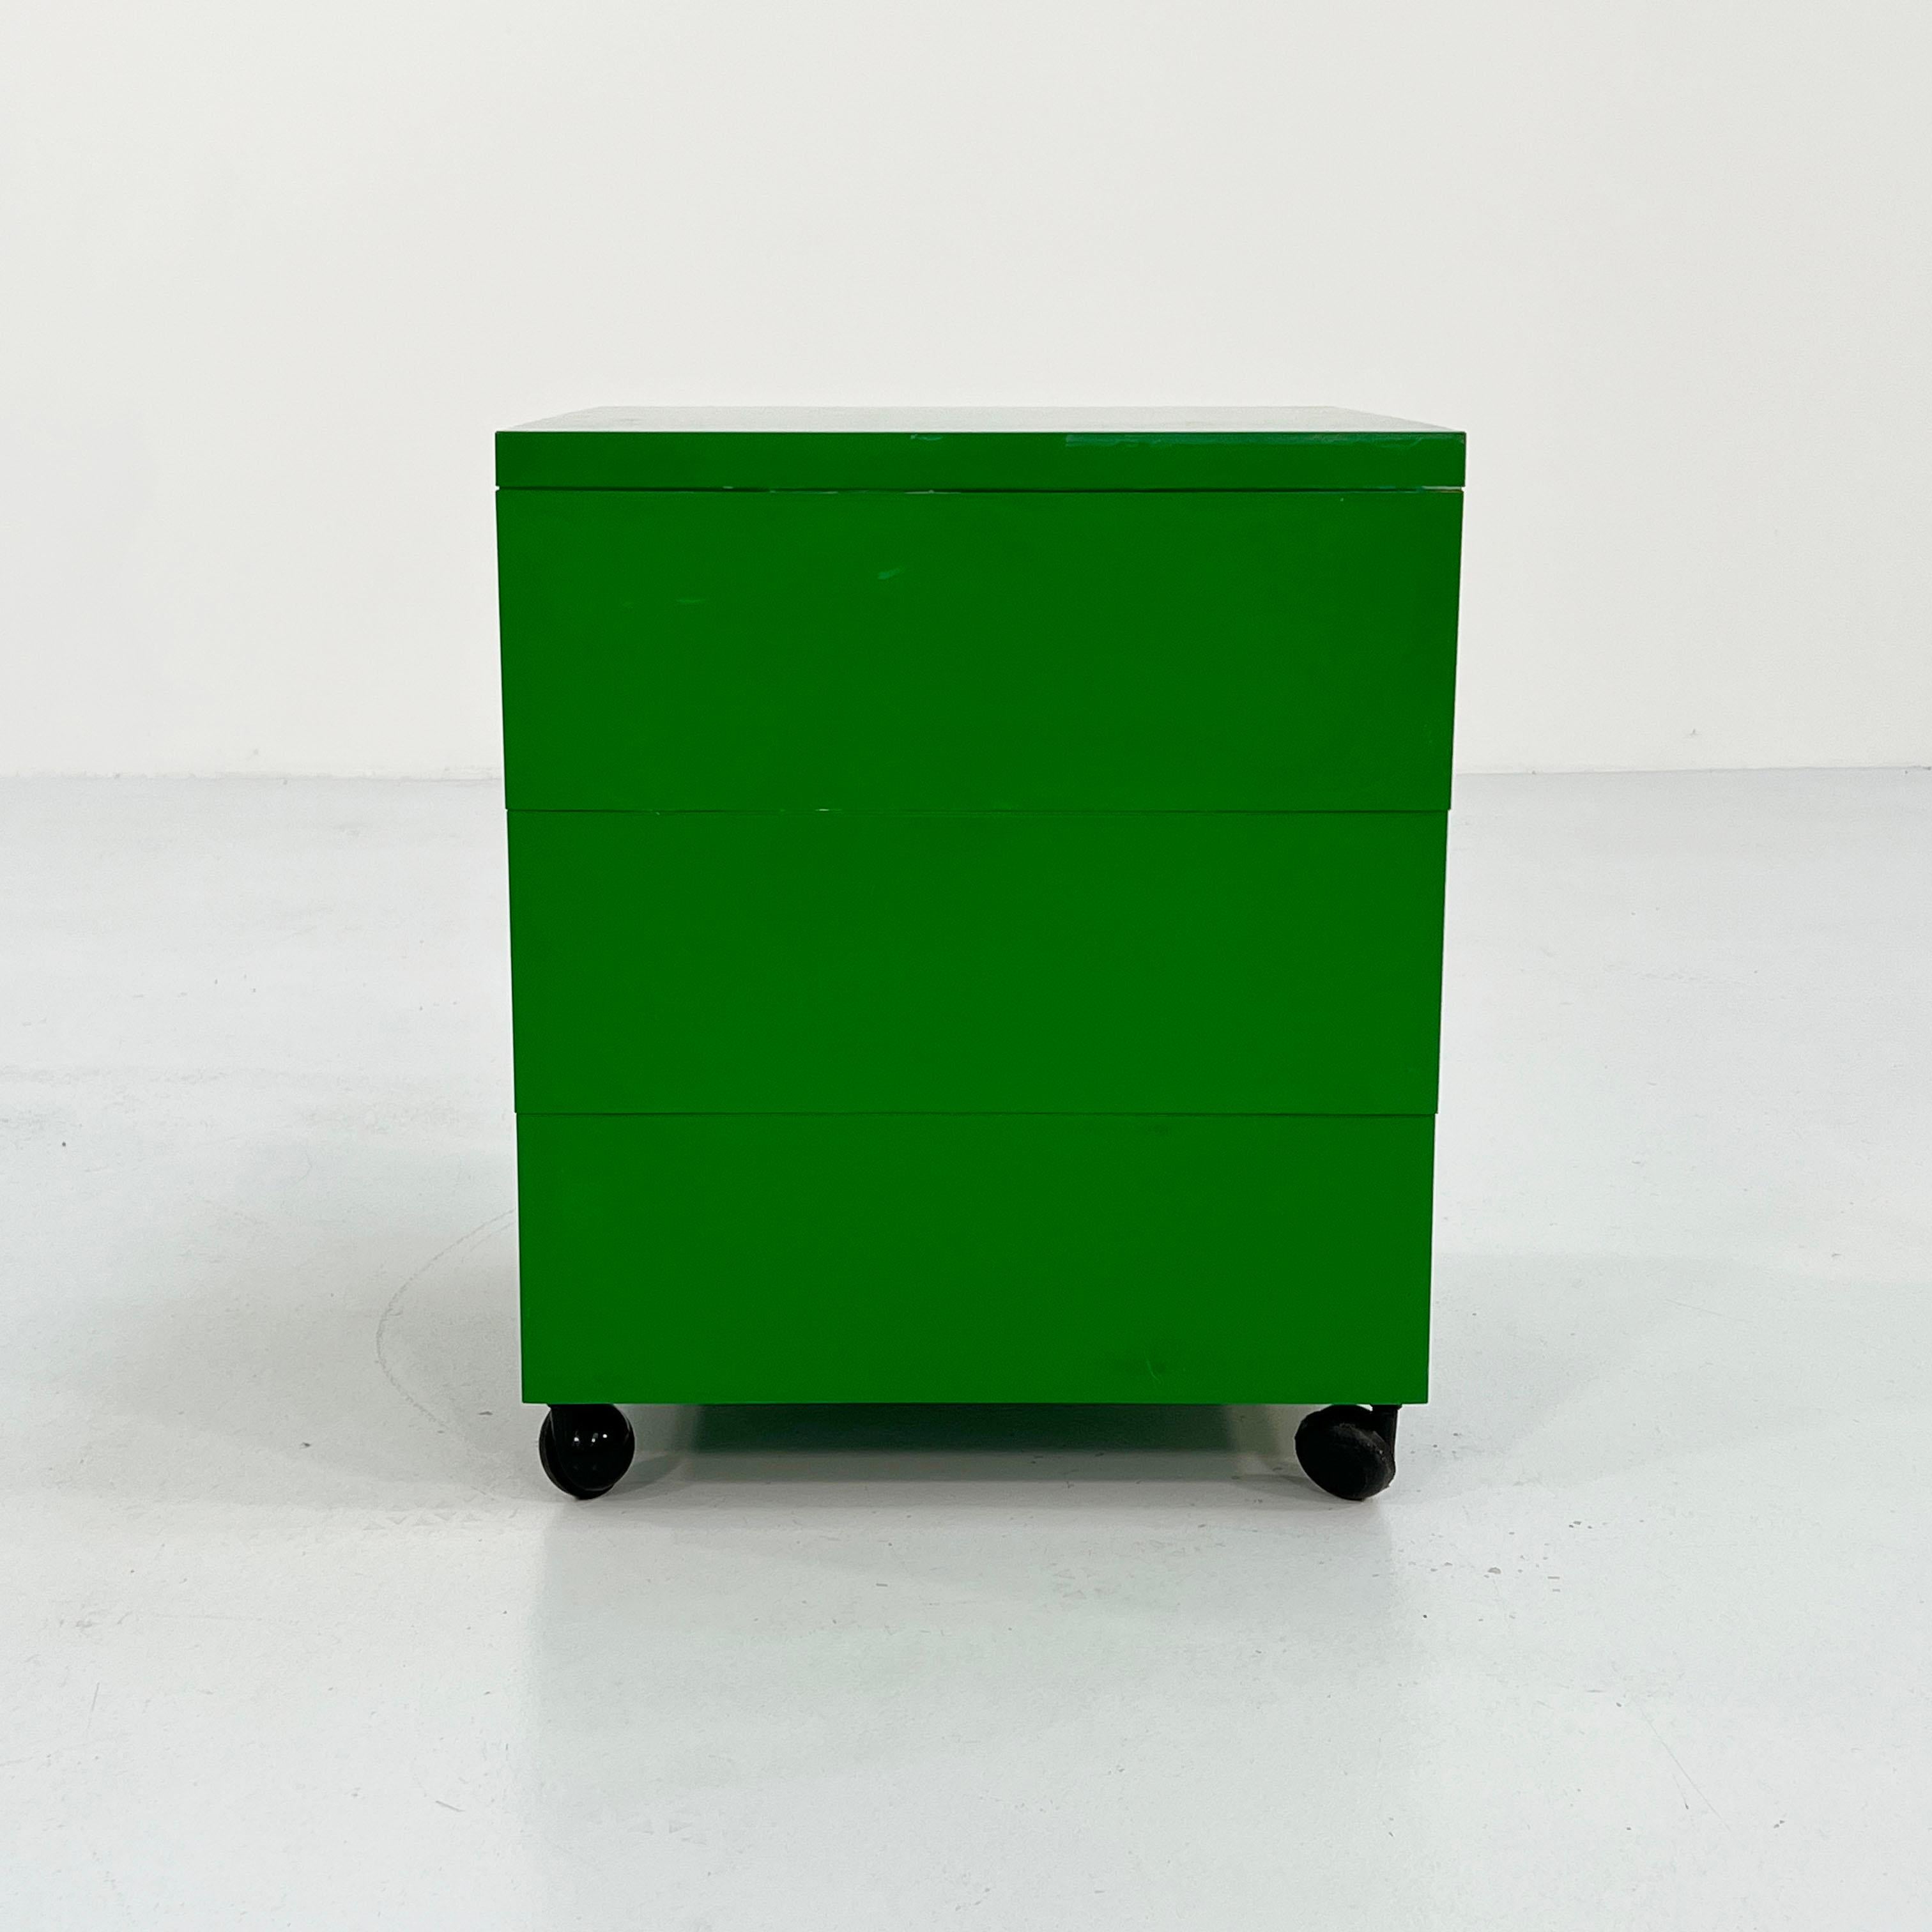 Late 20th Century Chest of Drawers on Wheels Model “4601” by Simon Fussell for Kartell, 1970s